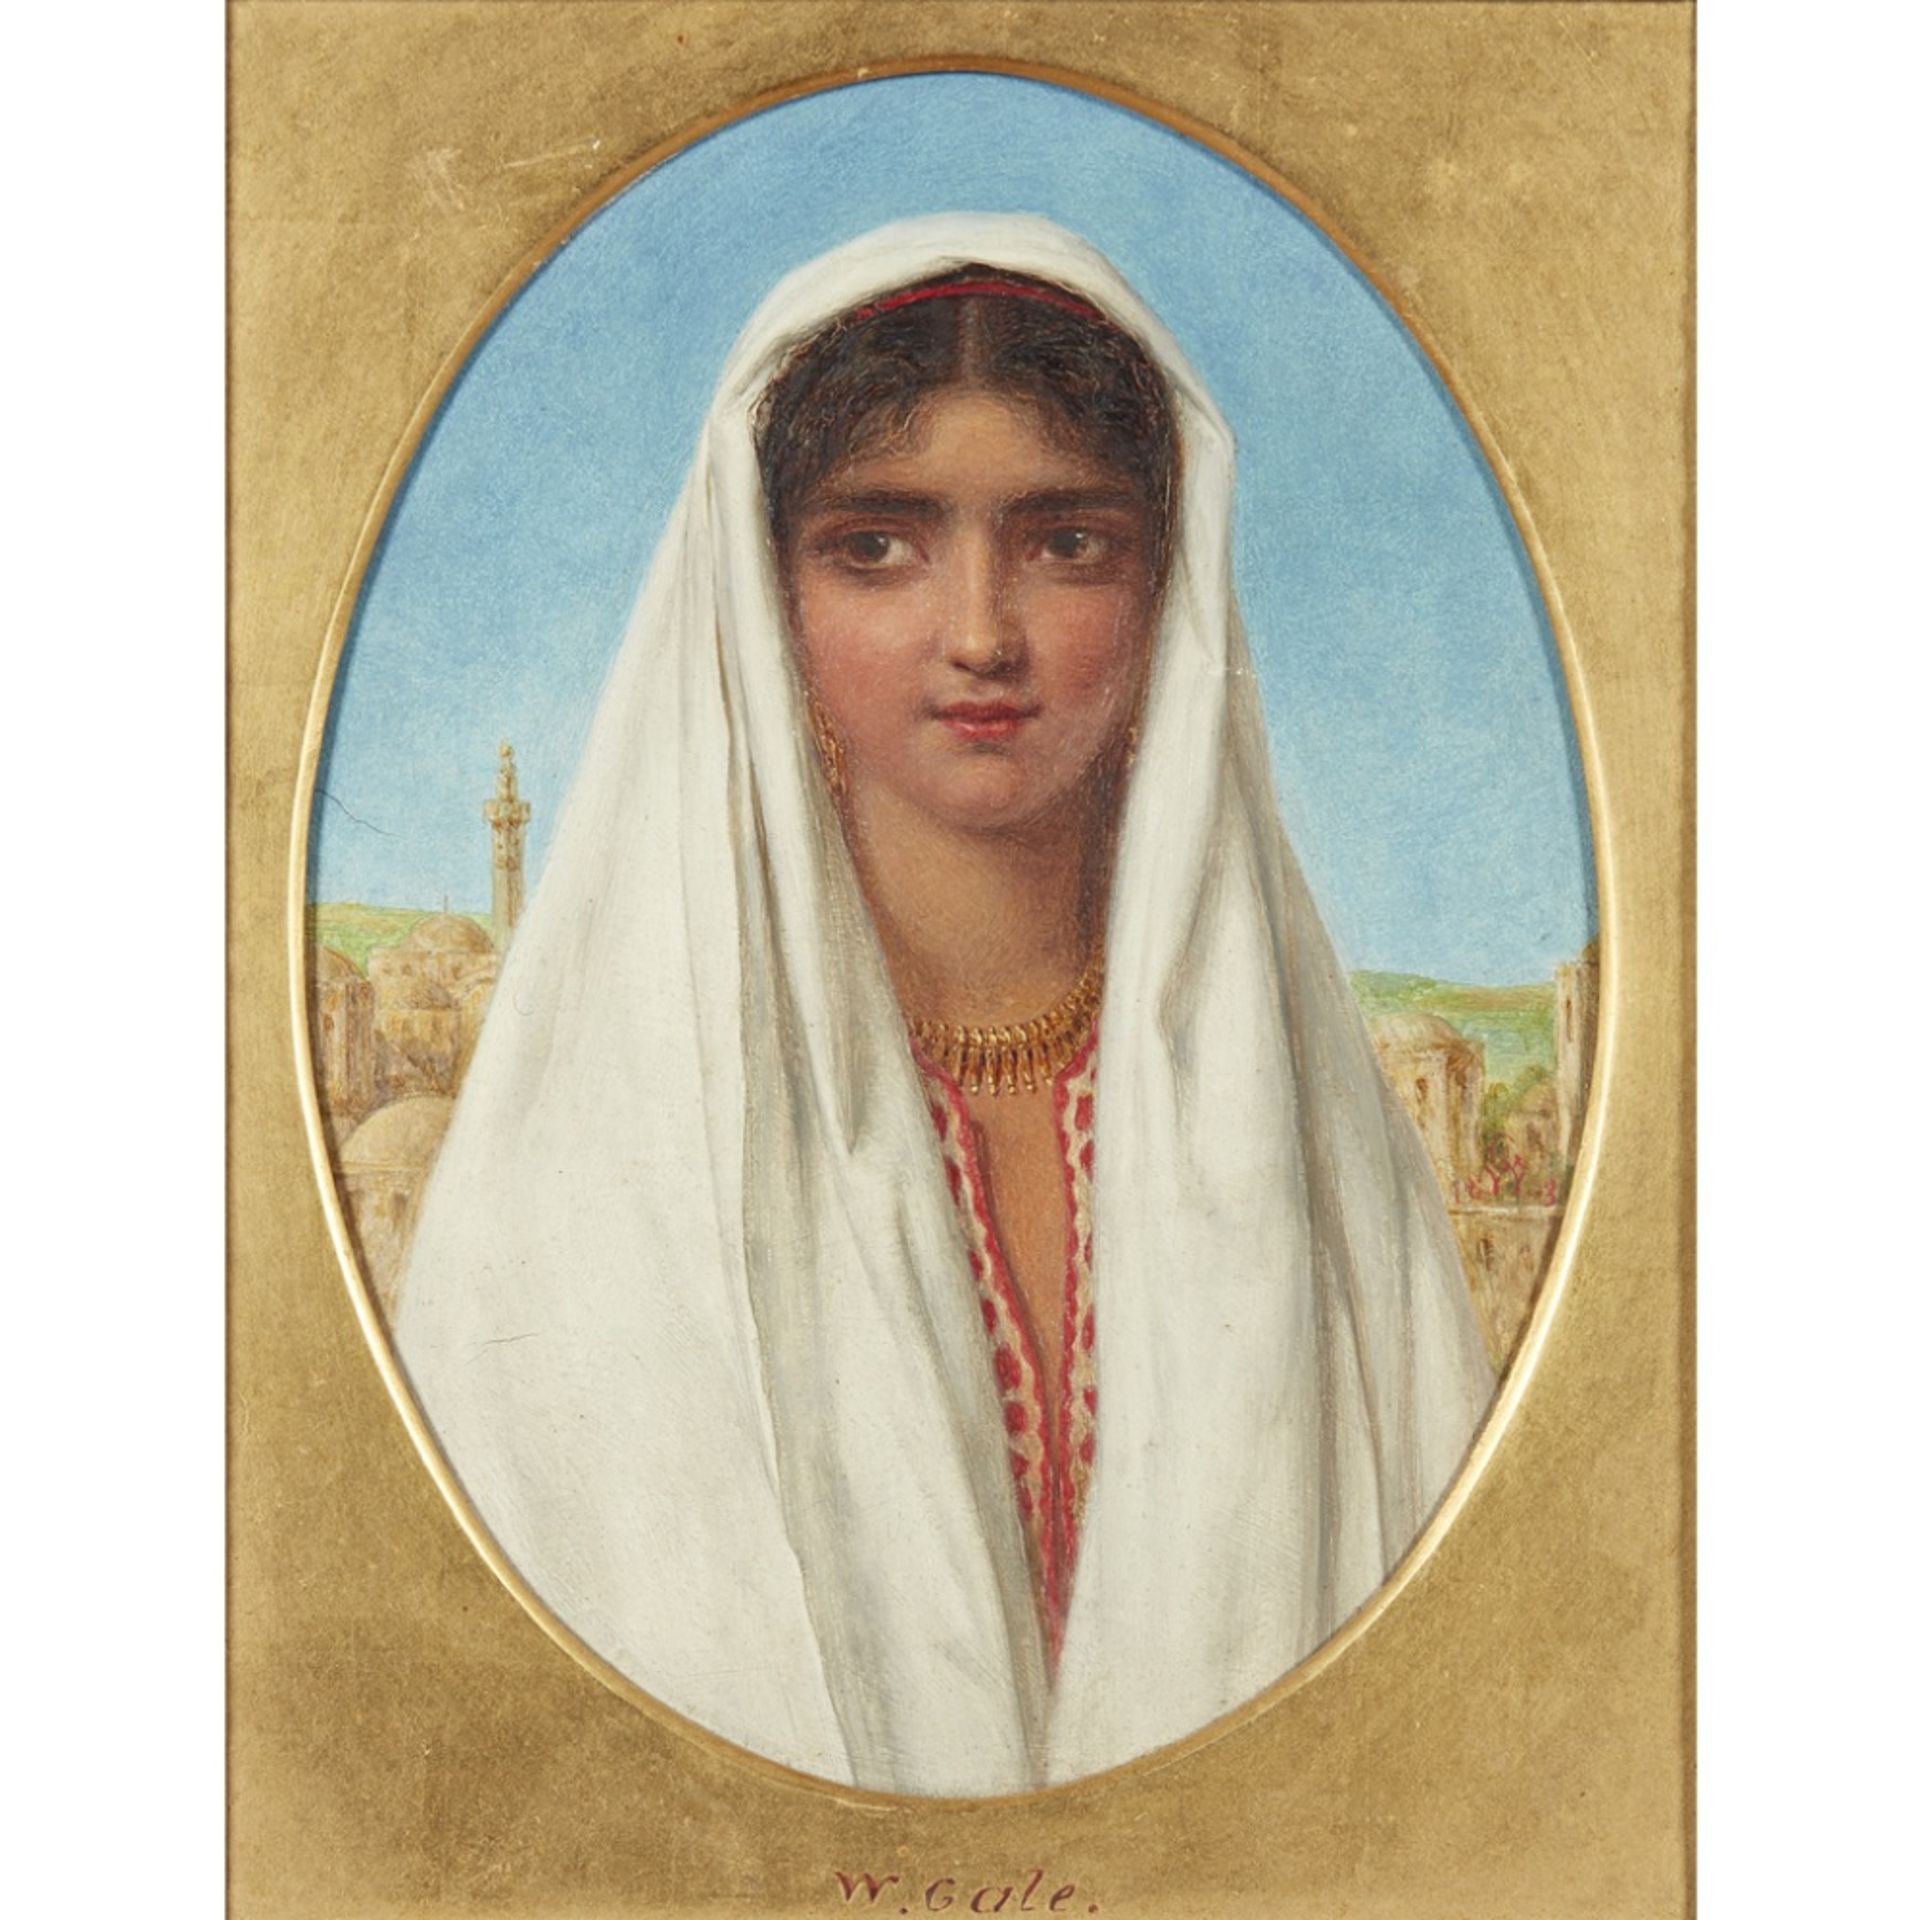 WILLIAM GALE (BRITISH 1823-1909)PORTRAIT OF AN ARAB GIRL Signed with monogram and dated 1863, oil on